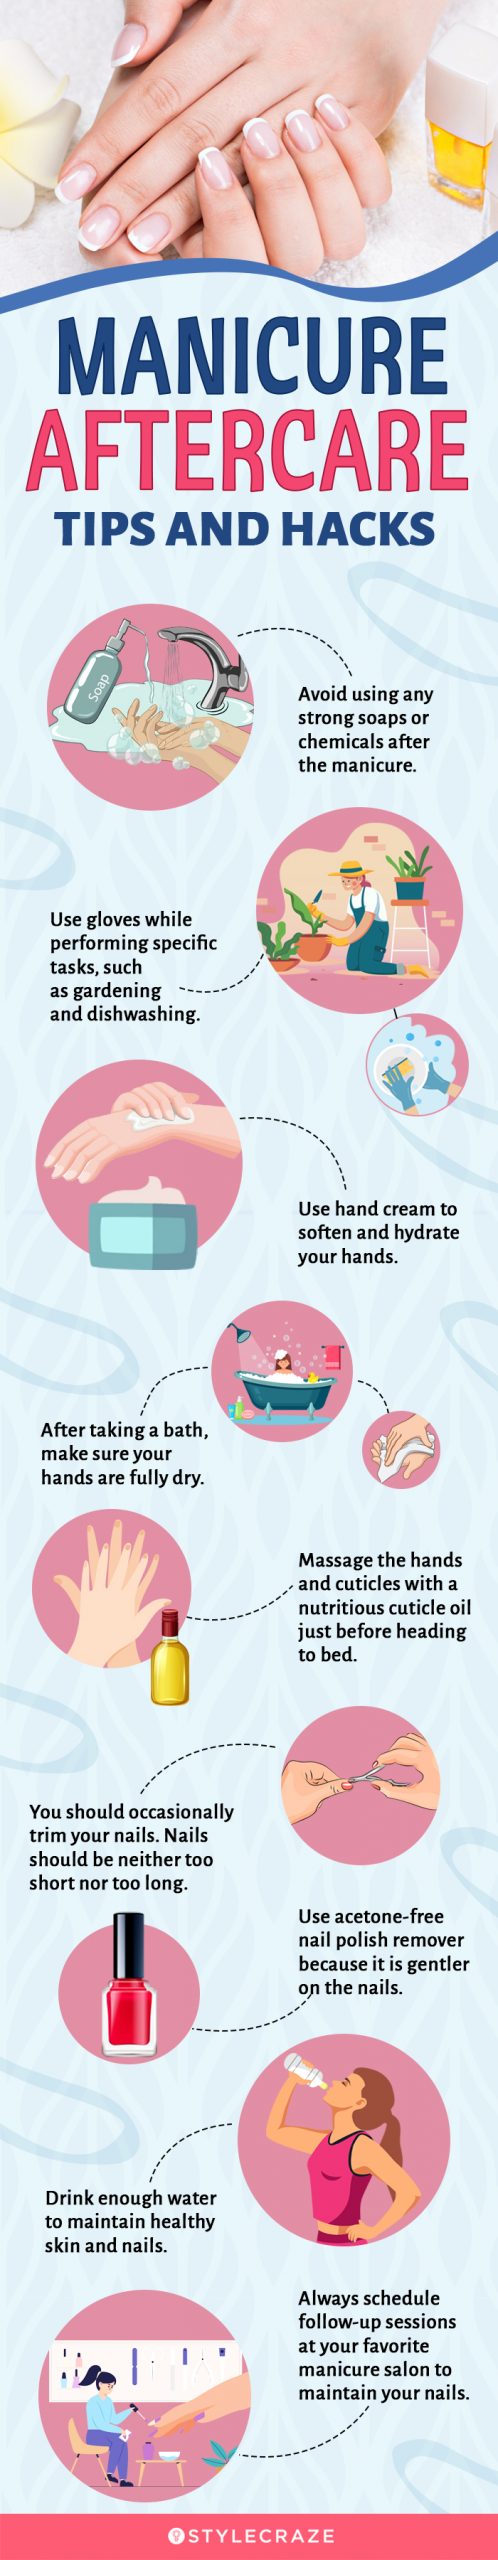 manicure aftercare tips and hacks (infographic)